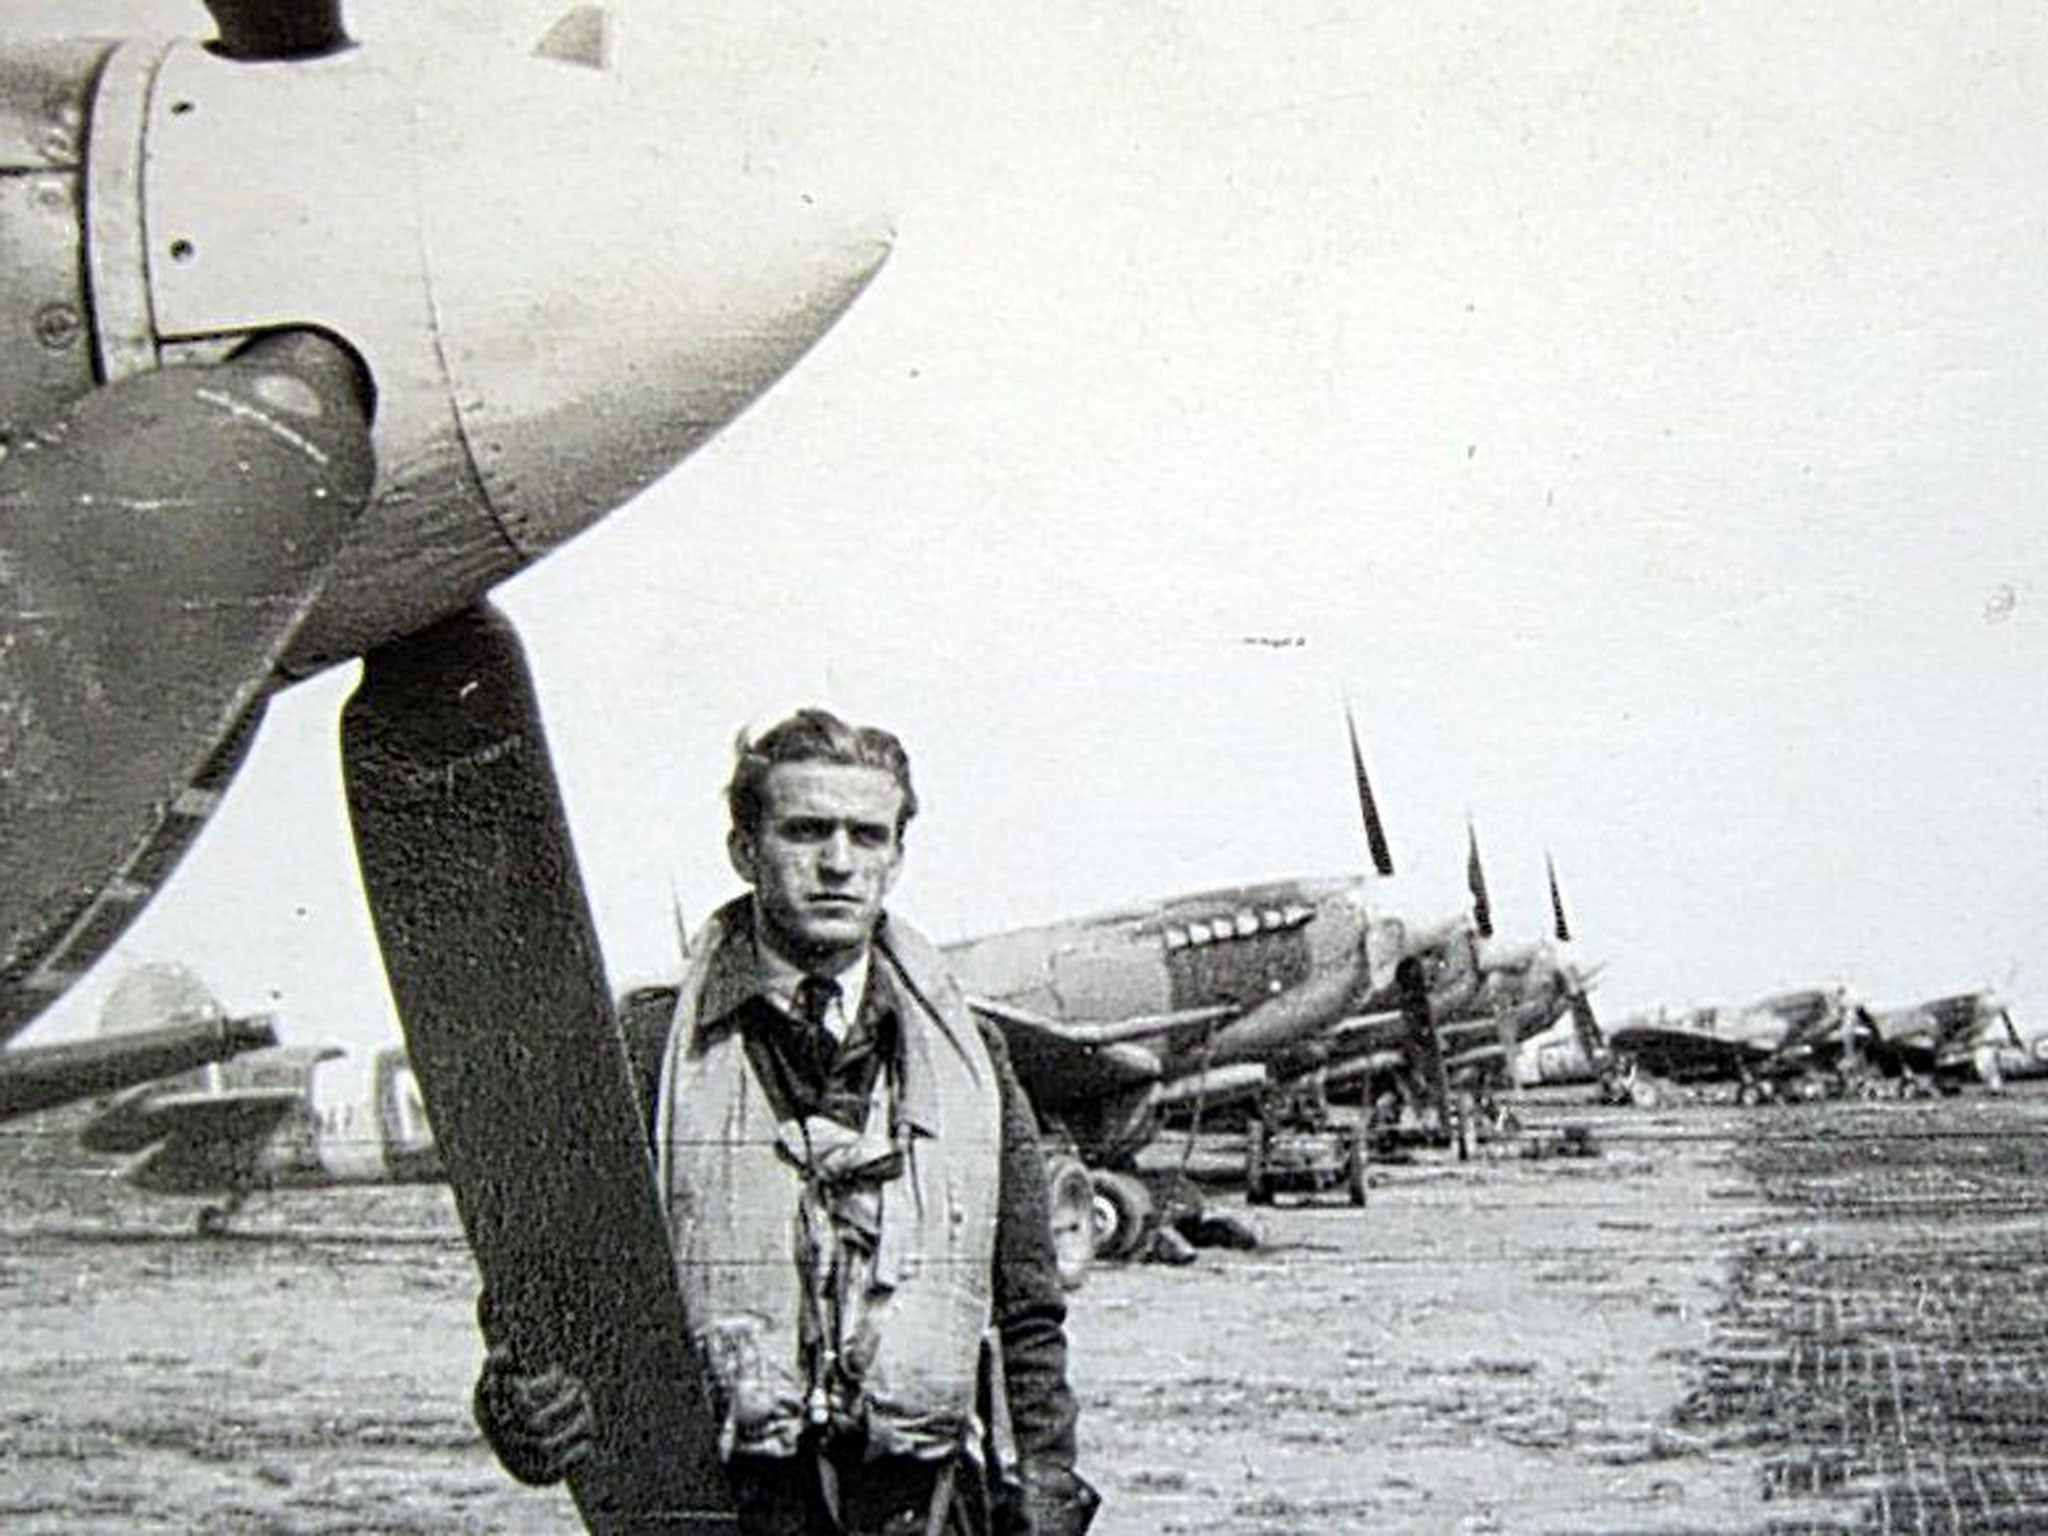 Kratochvil: he flew with RAF 310 Squadron, which was
made up of Czech fliers